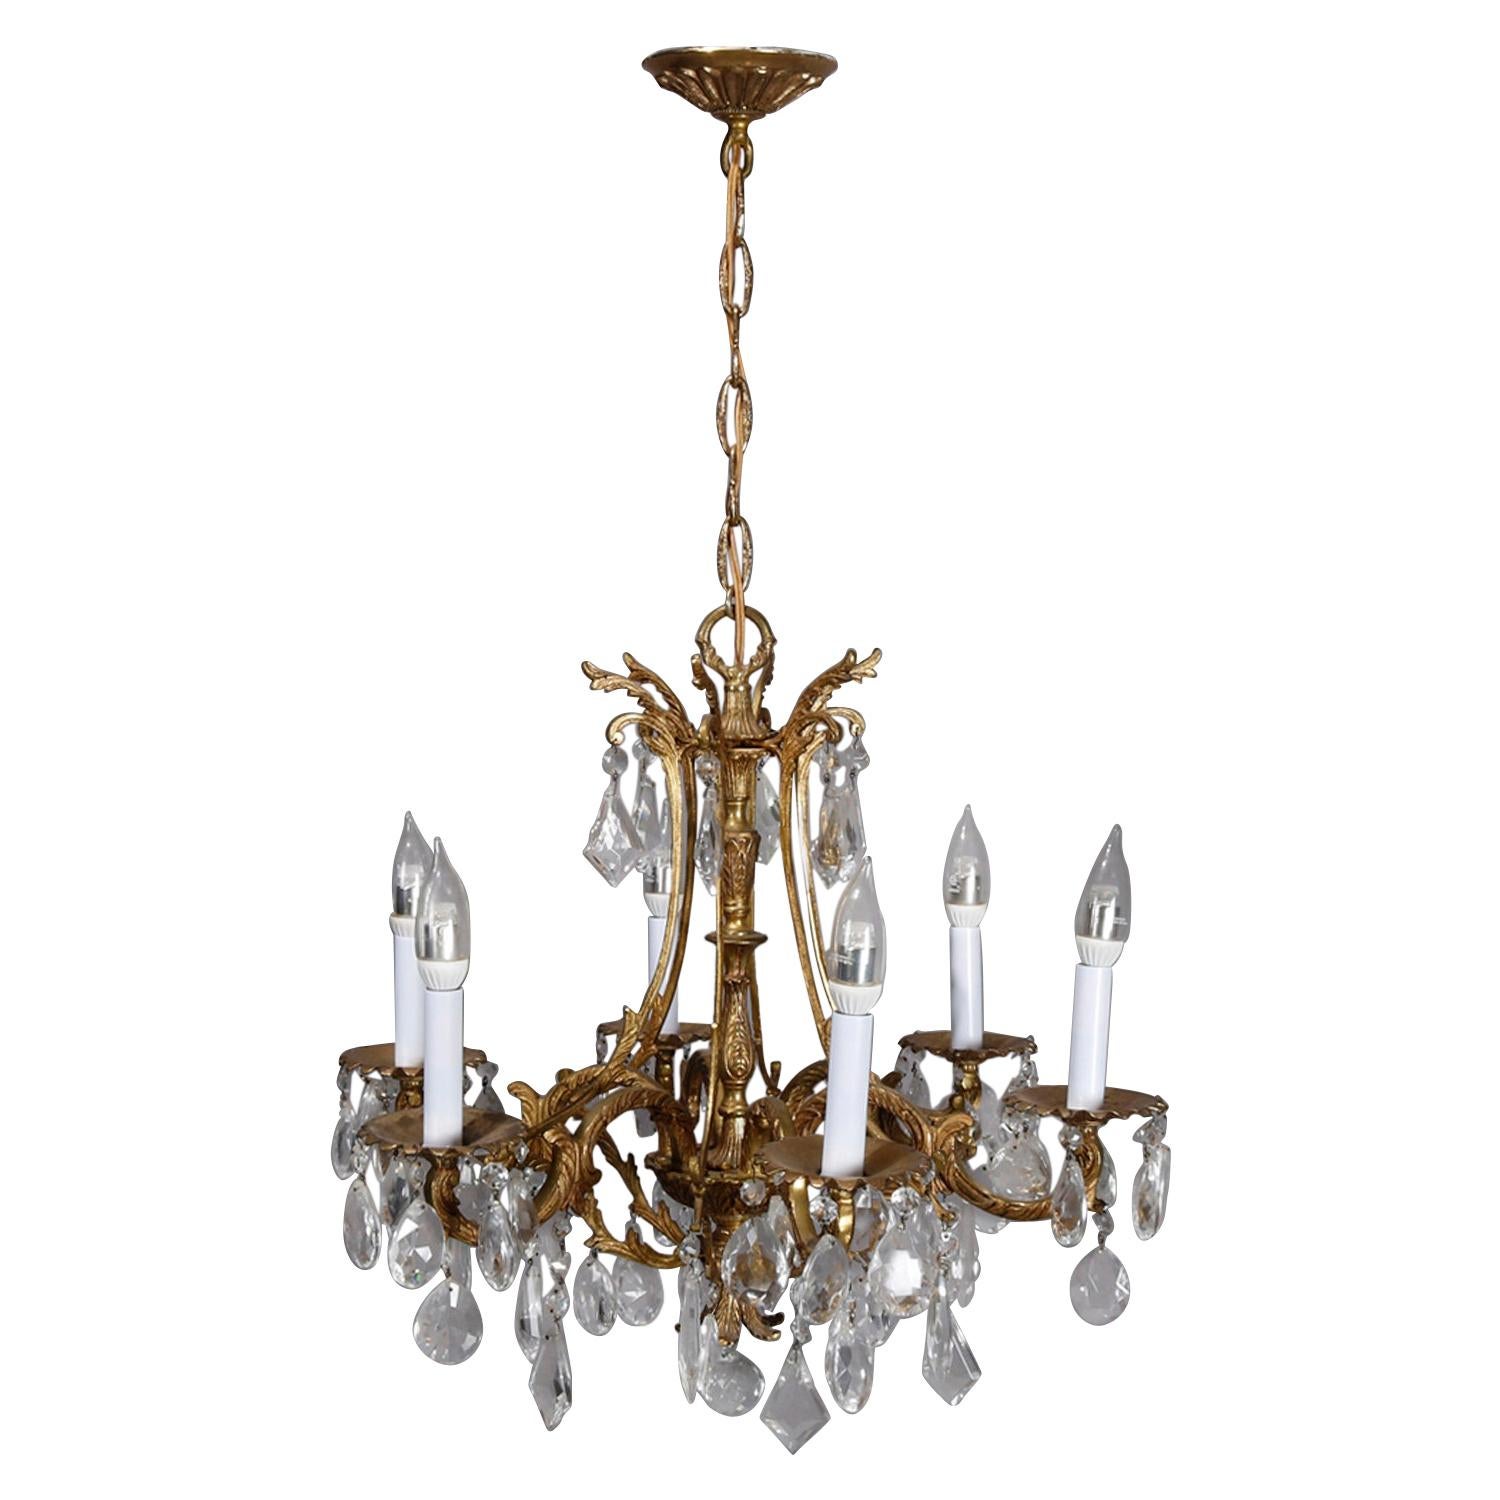 Vintage French Louis XIV Style Gilt Bronze and Crystal Chandelier, 20th Century